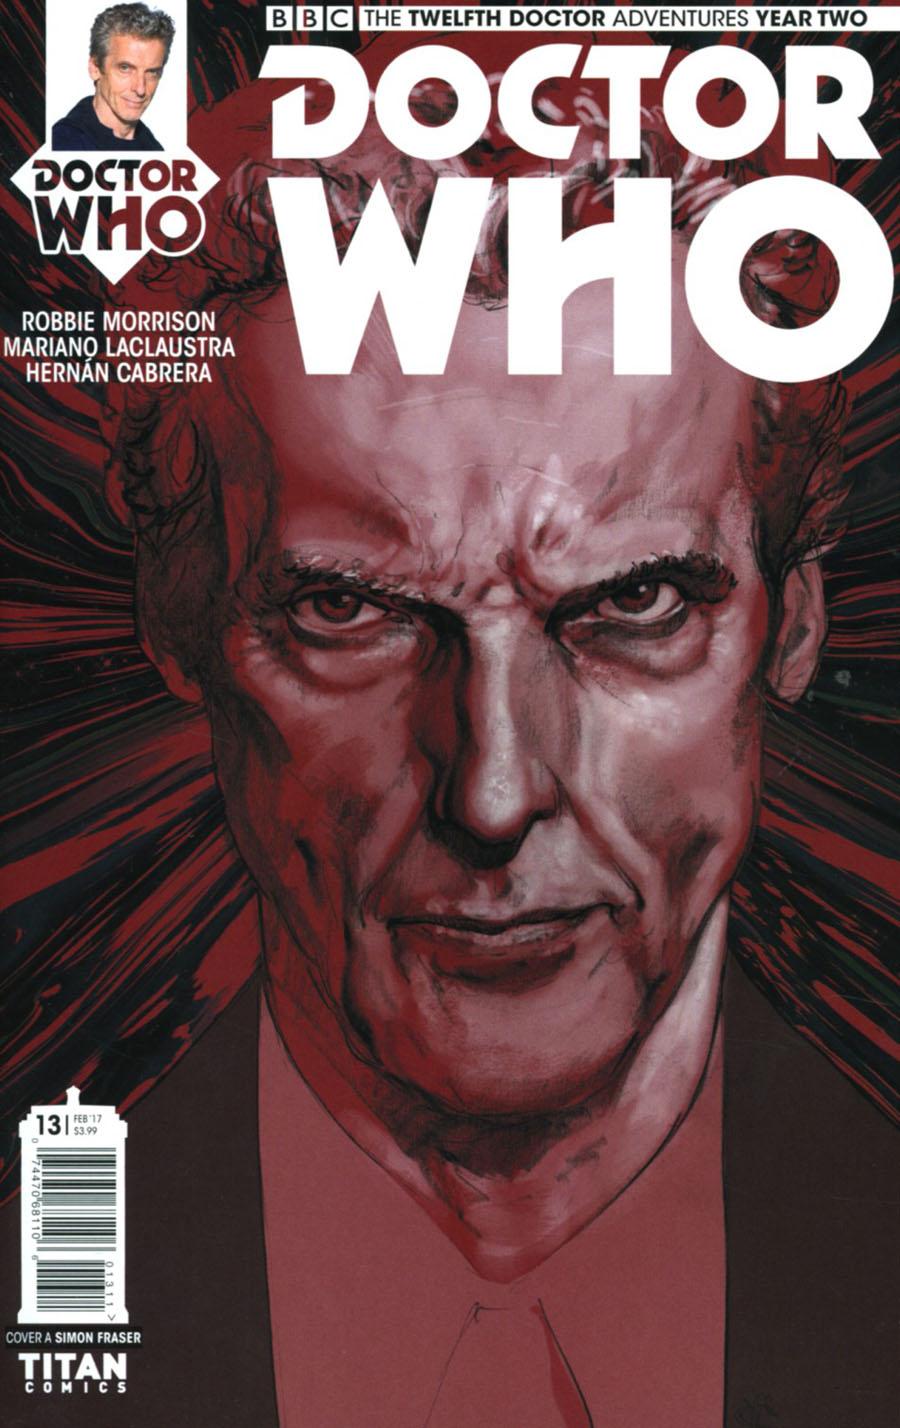 Doctor Who 12th Doctor Year Two Vol. 1 #13